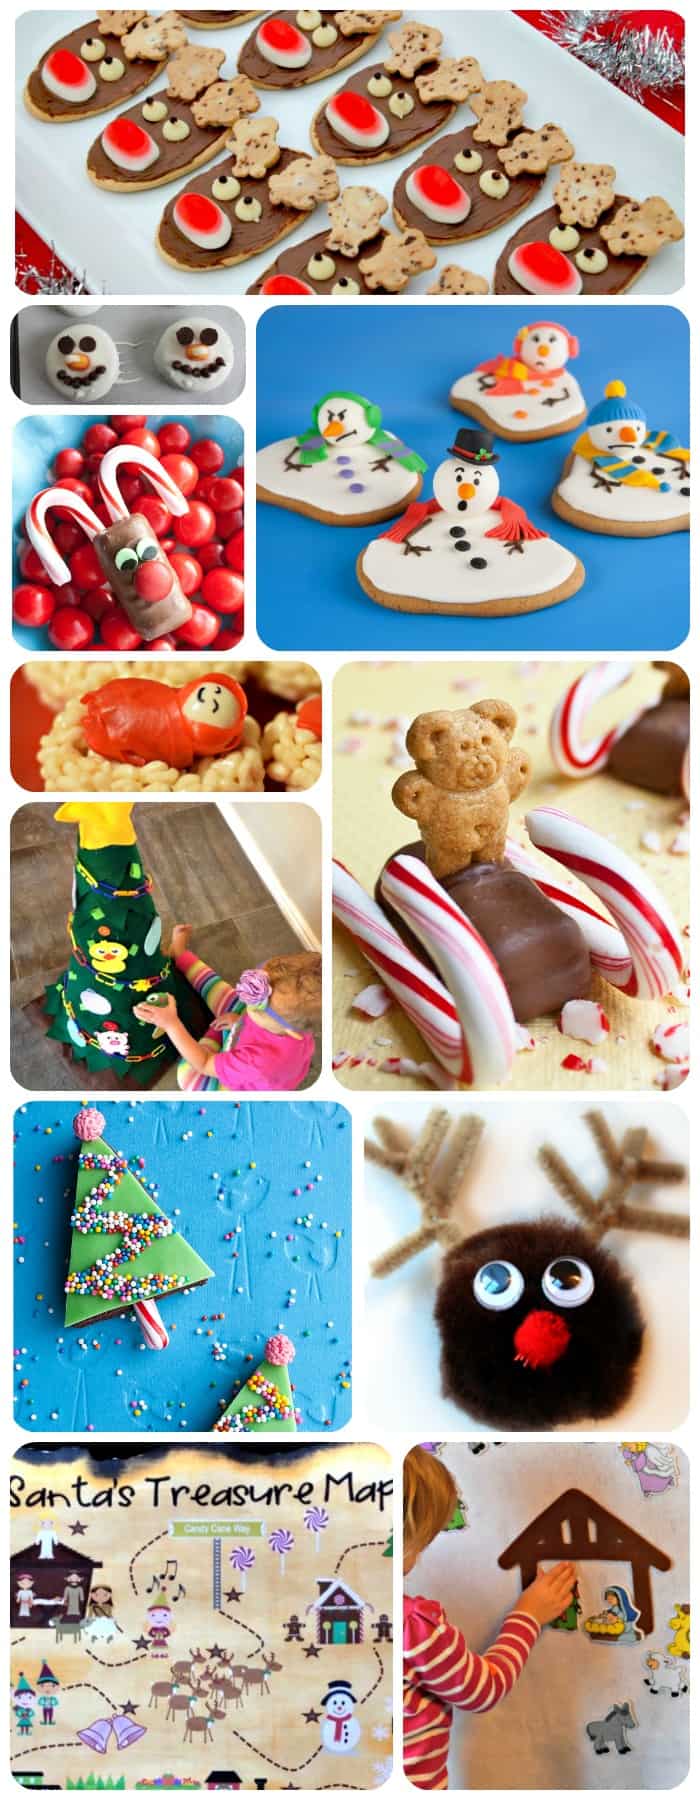 Christmas Treats and Crafts for Kids